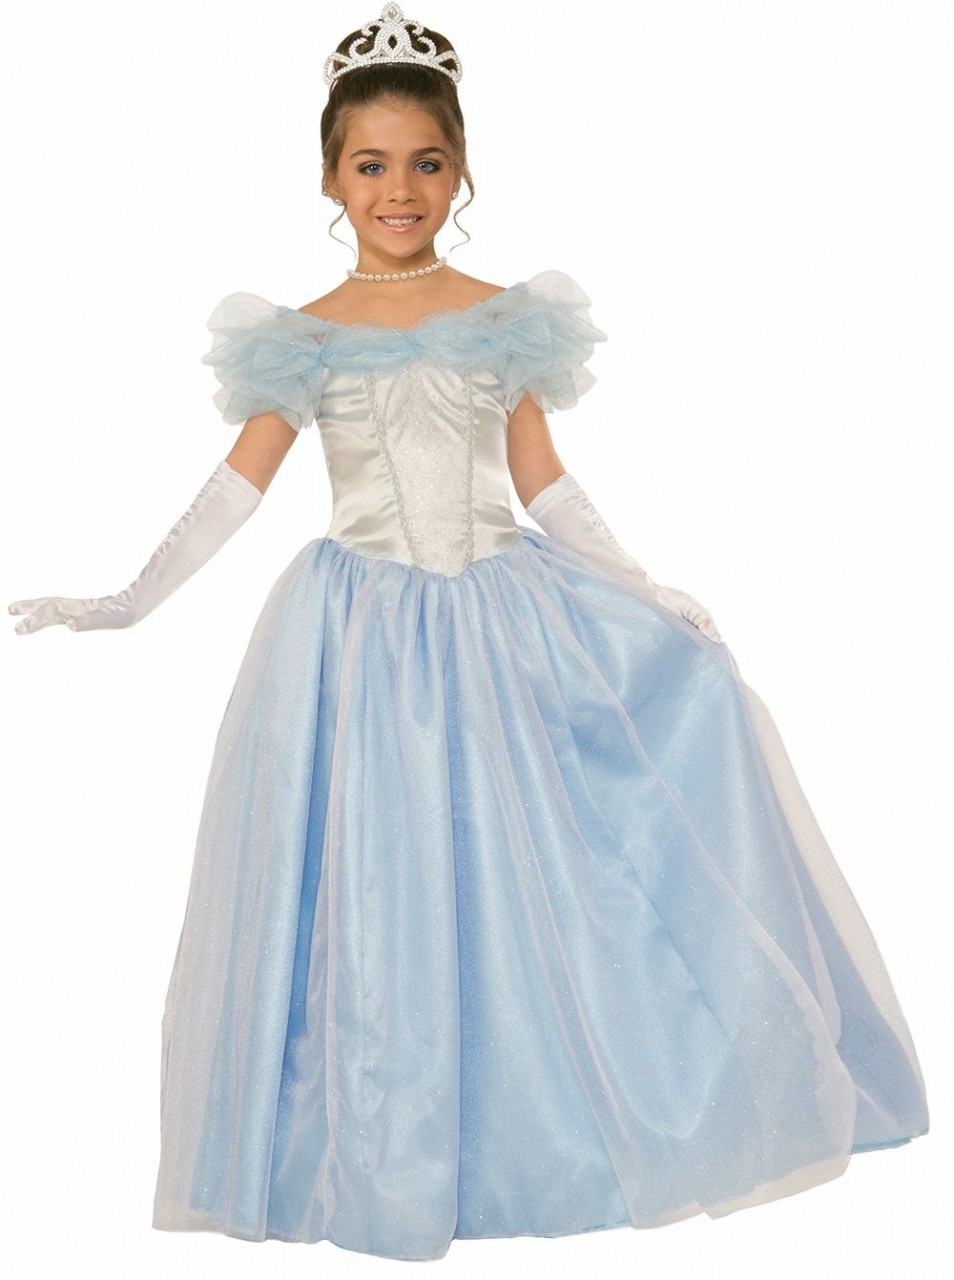 Happily Ever After Child Princess Costume - Screamers Costumes